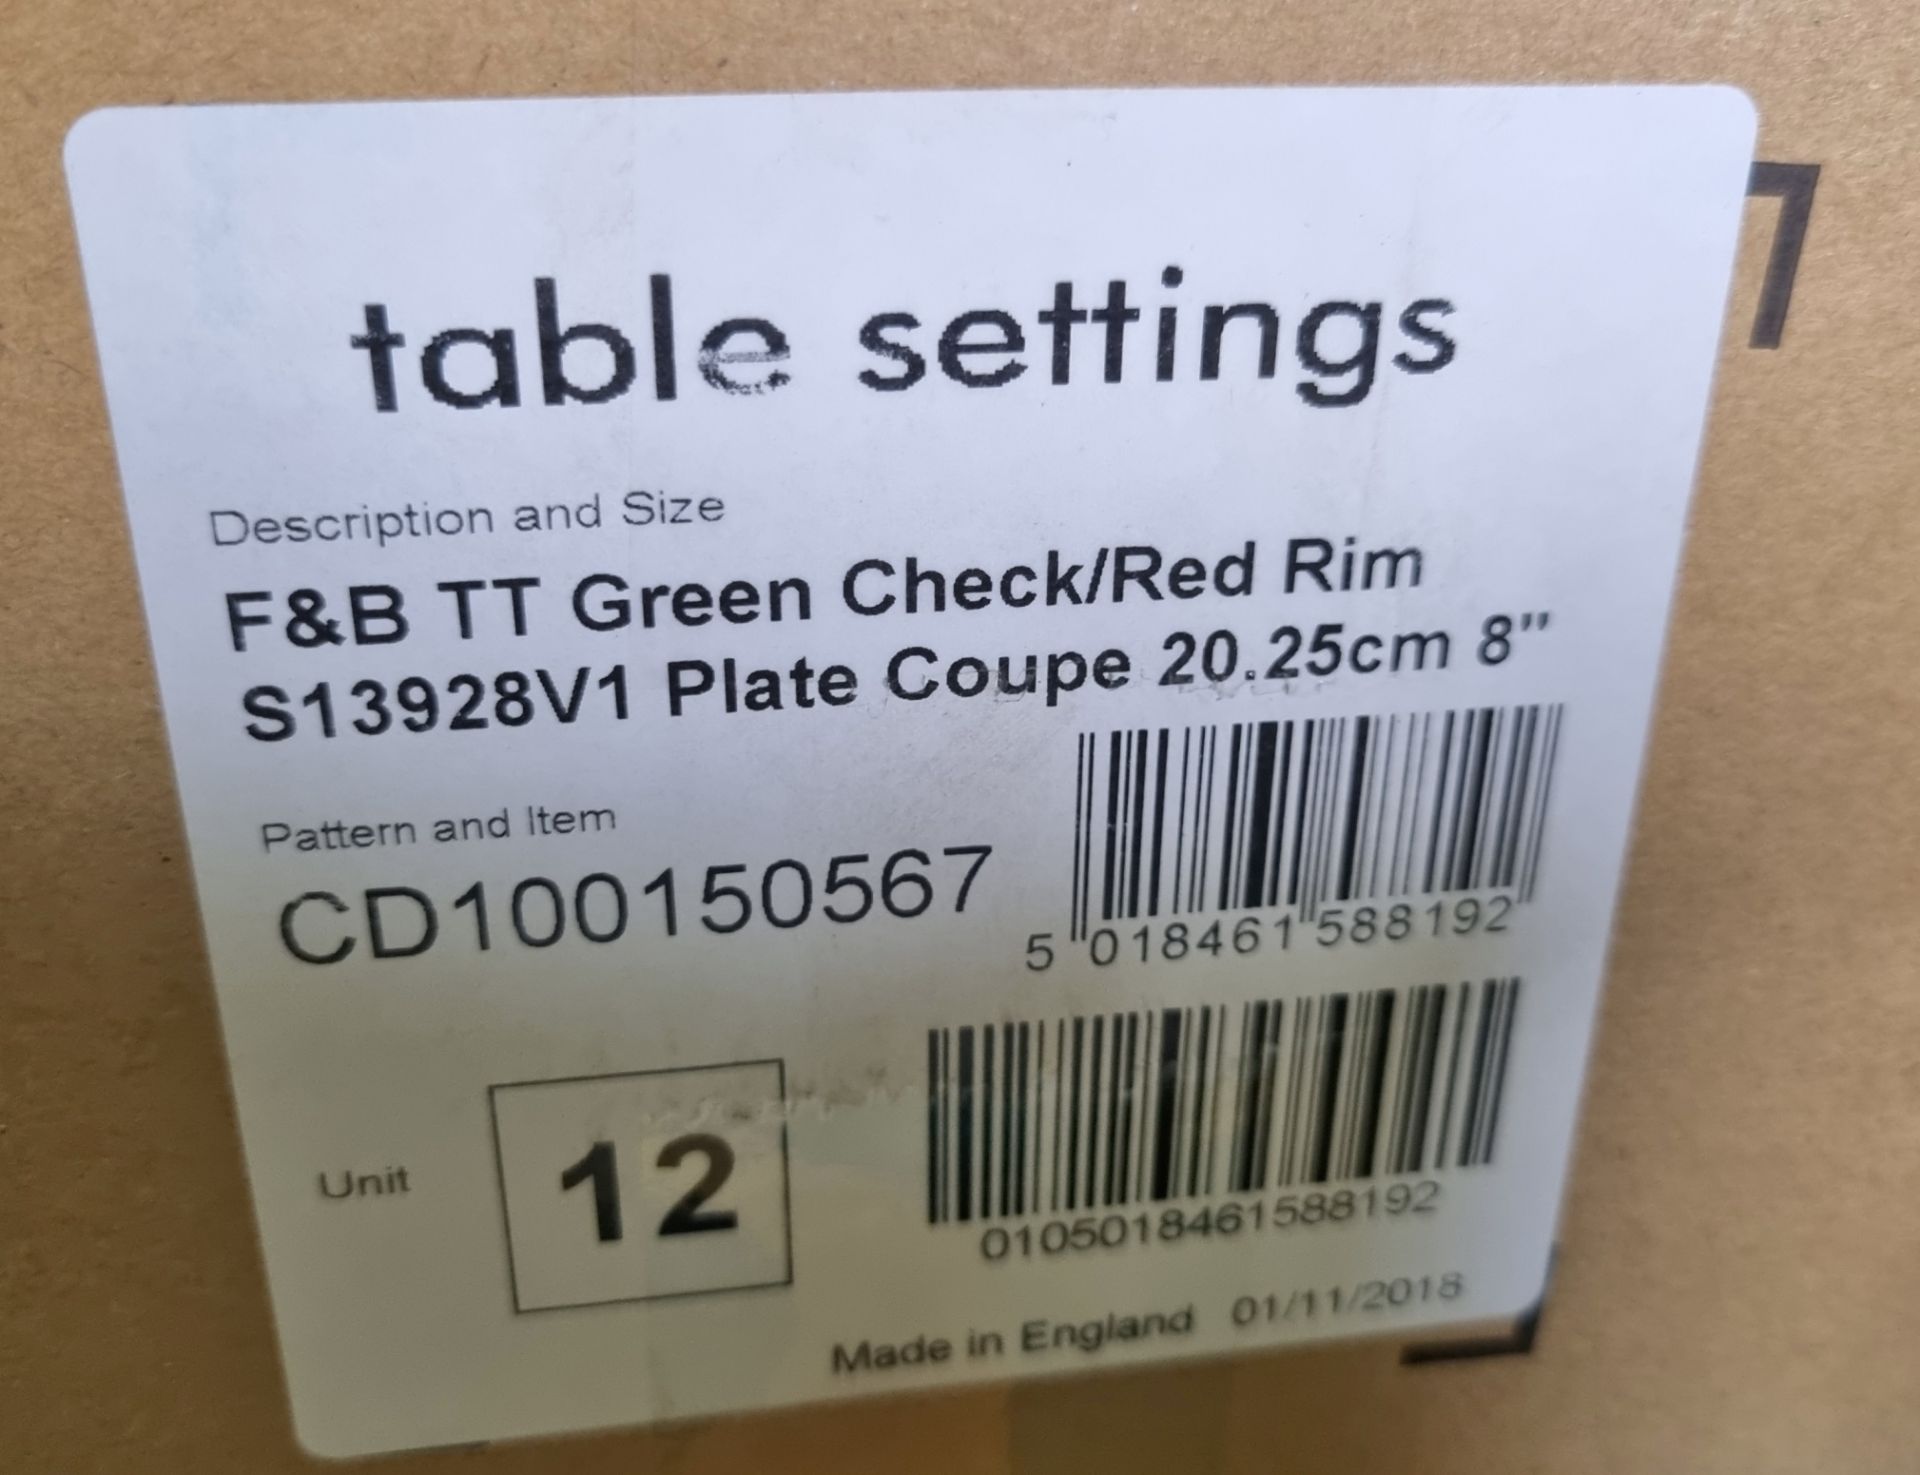 6x Boxes of 12 green check/red rim coupe plates 20.25cm/8" diameter - Image 3 of 3